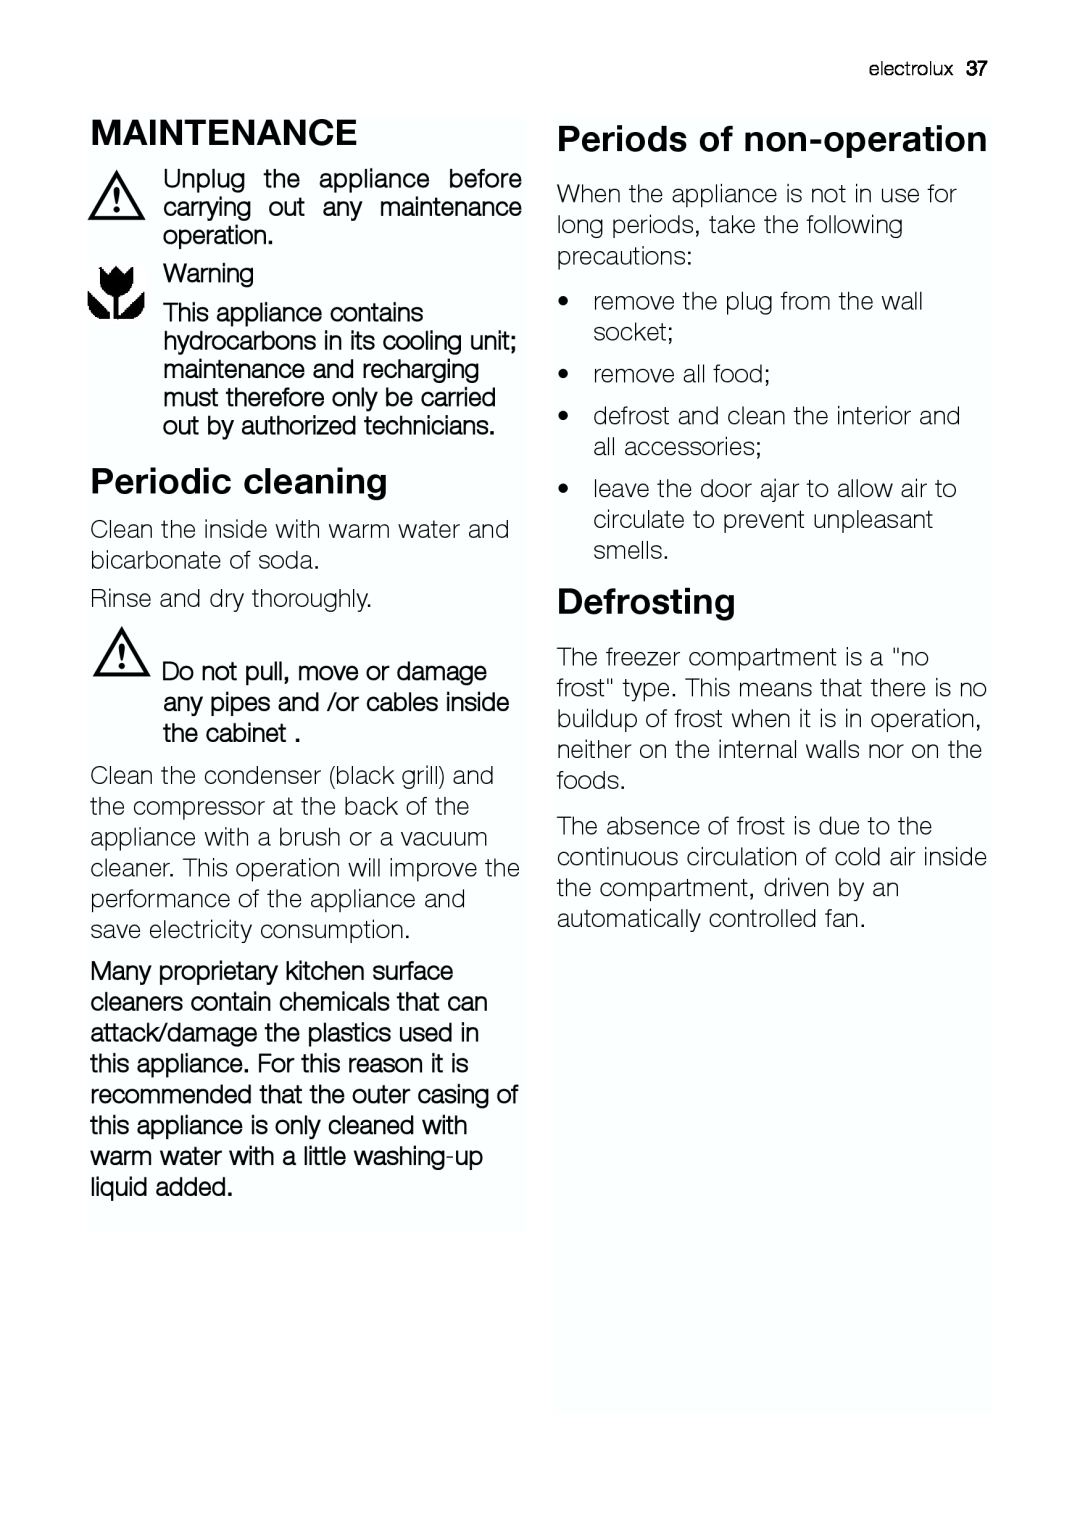 Electrolux EUF 27391 S manual Maintenance, Periodic cleaning, Periods of non-operation, Defrosting 